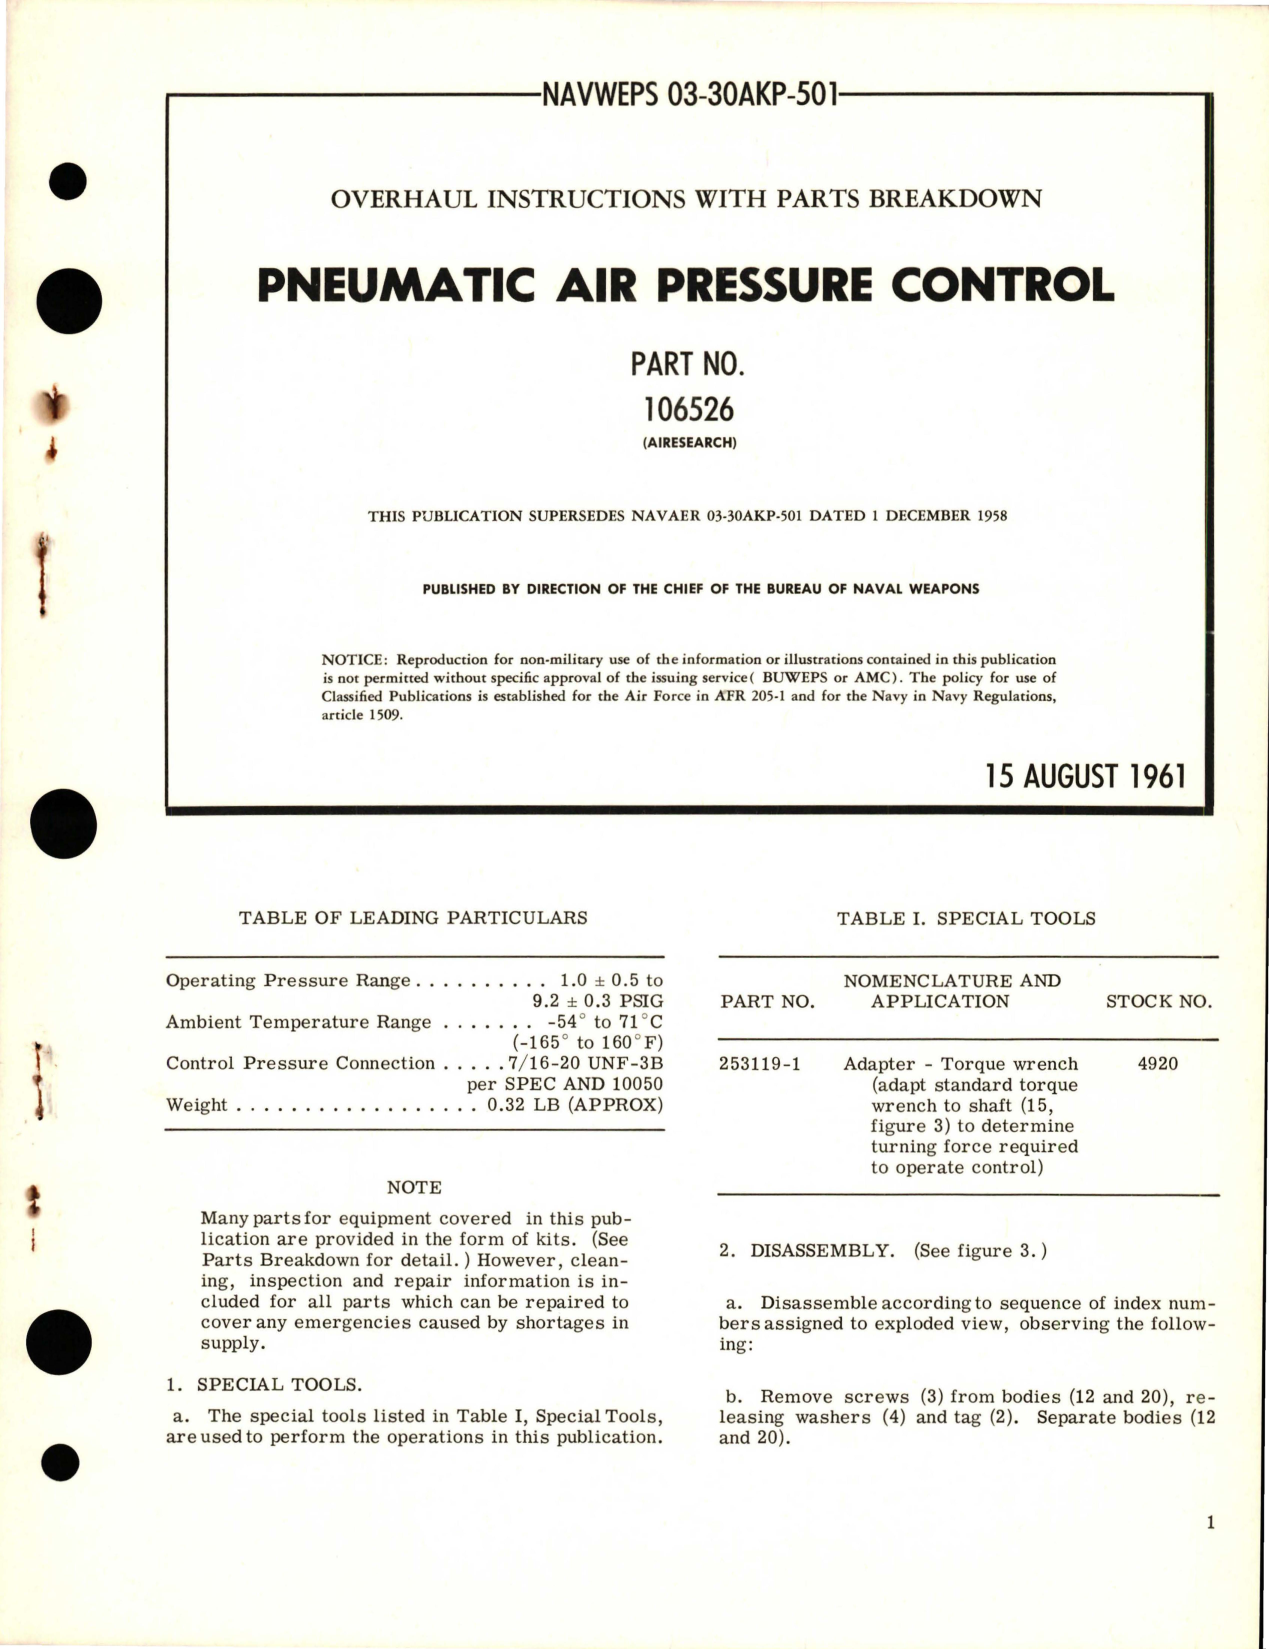 Sample page 1 from AirCorps Library document: Overhaul Instructions with Parts Breakdown for Pneumatic Air Pressure Control - Part 106526